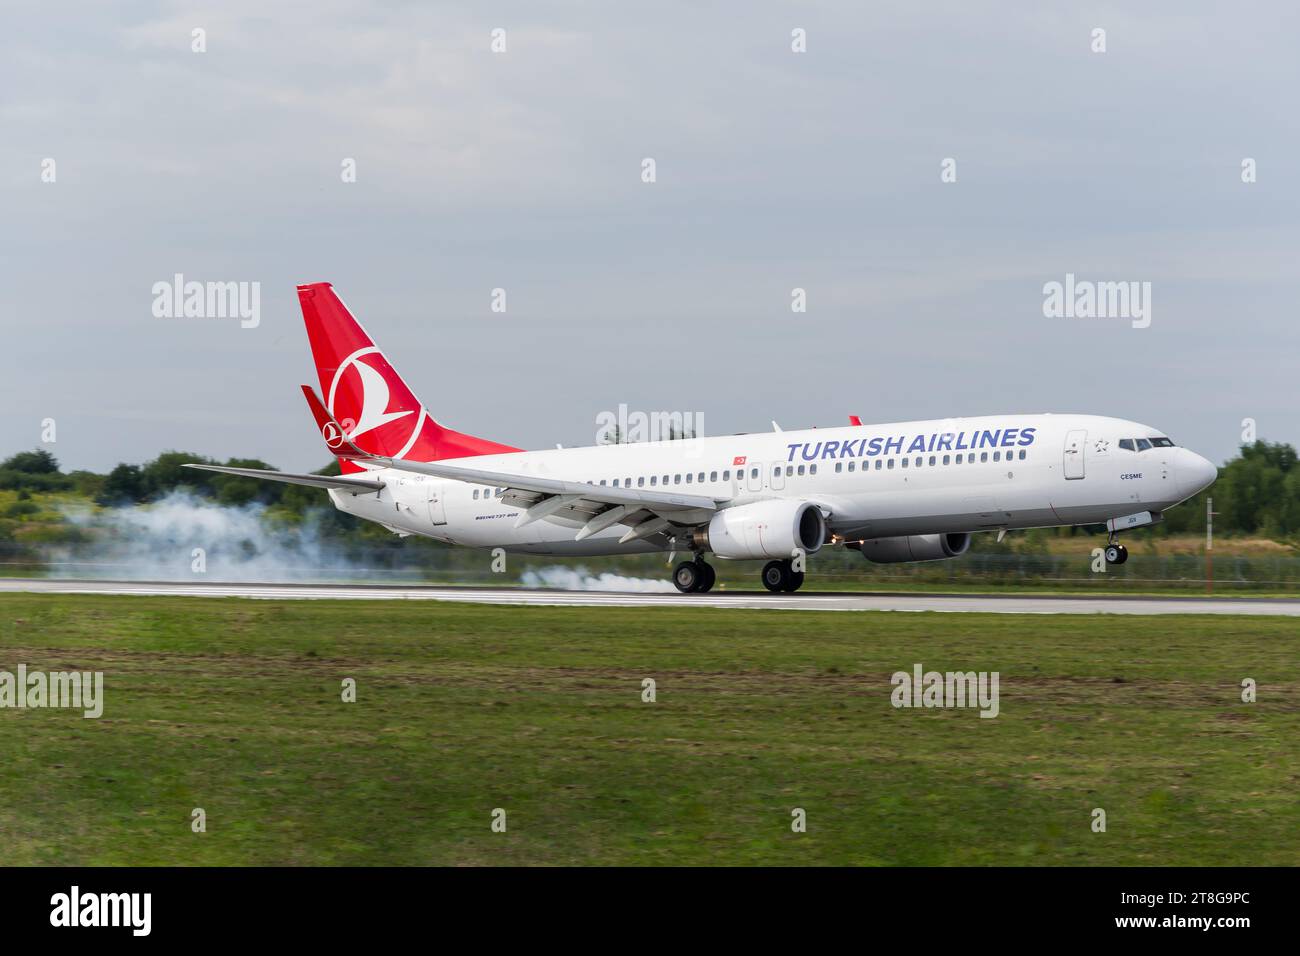 Turkish Airlines Boeing 737-800 touching down at Lviv International Airport after a flight from Istanbul, Turkey Stock Photo